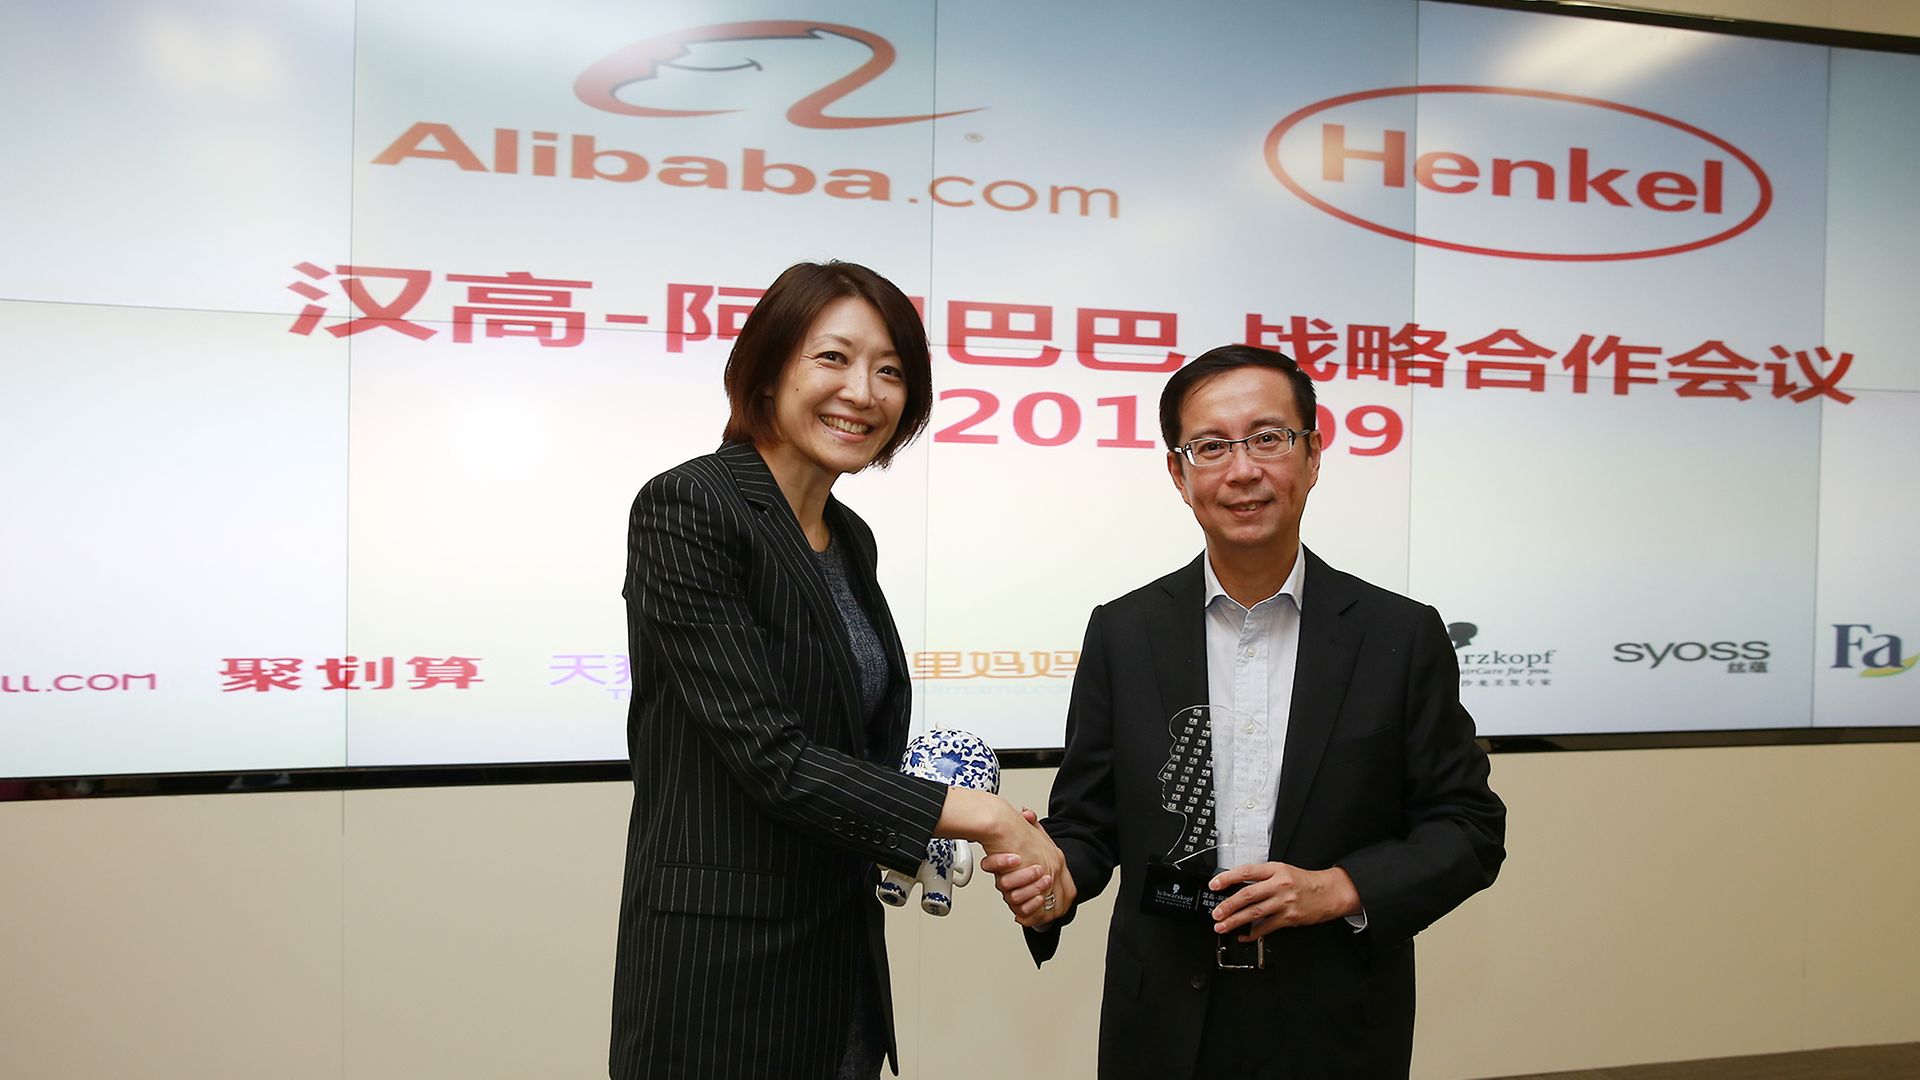 Michelle Cheung, Corporate Senior Vice President Henkel Beauty Care Asia Pacific and APAC President, and Alibaba CEO Yong Zhang